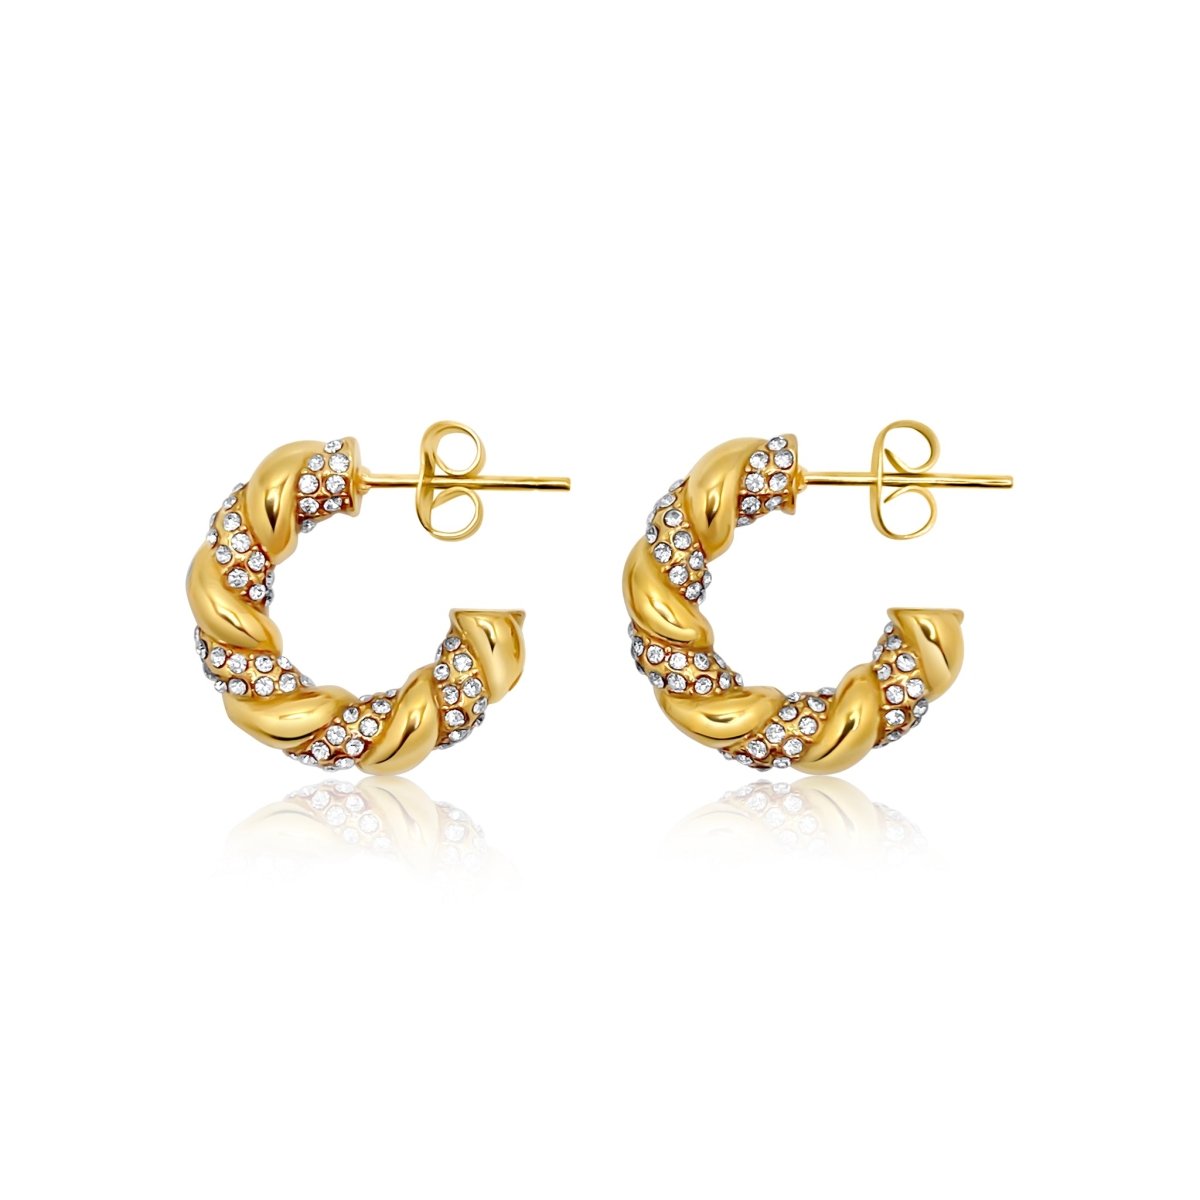 Women's stainless steel 18K gold plated Alyssa earrings featuring an exquisite twisting design with sparkling cubic zirconia, waterproof fashion jewelry for everyday wear and elegant occasions - B-Xquisite Jewelry gold Earrings